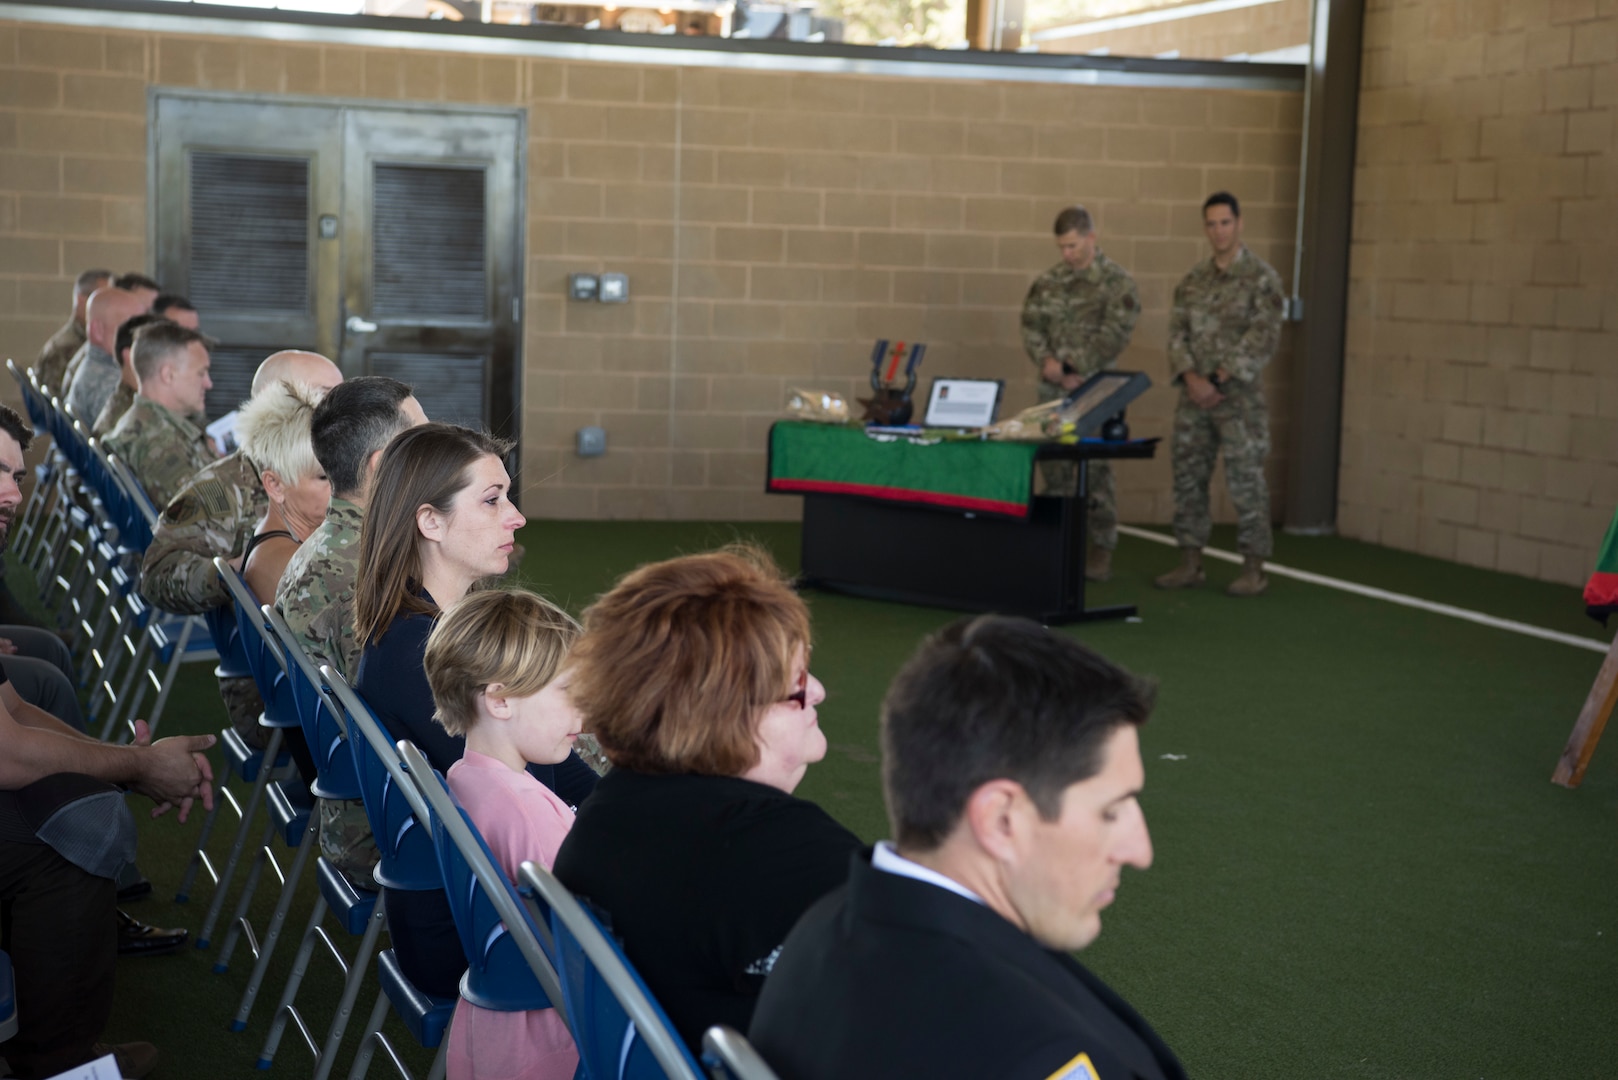 Family and friends of Senior Airman Bradley Smith, a fallen Special Tactic Airman, attend a dedication ceremony in his honor April 19 at Joint Base San Antonio-Lackland Medina Annex, Texas.